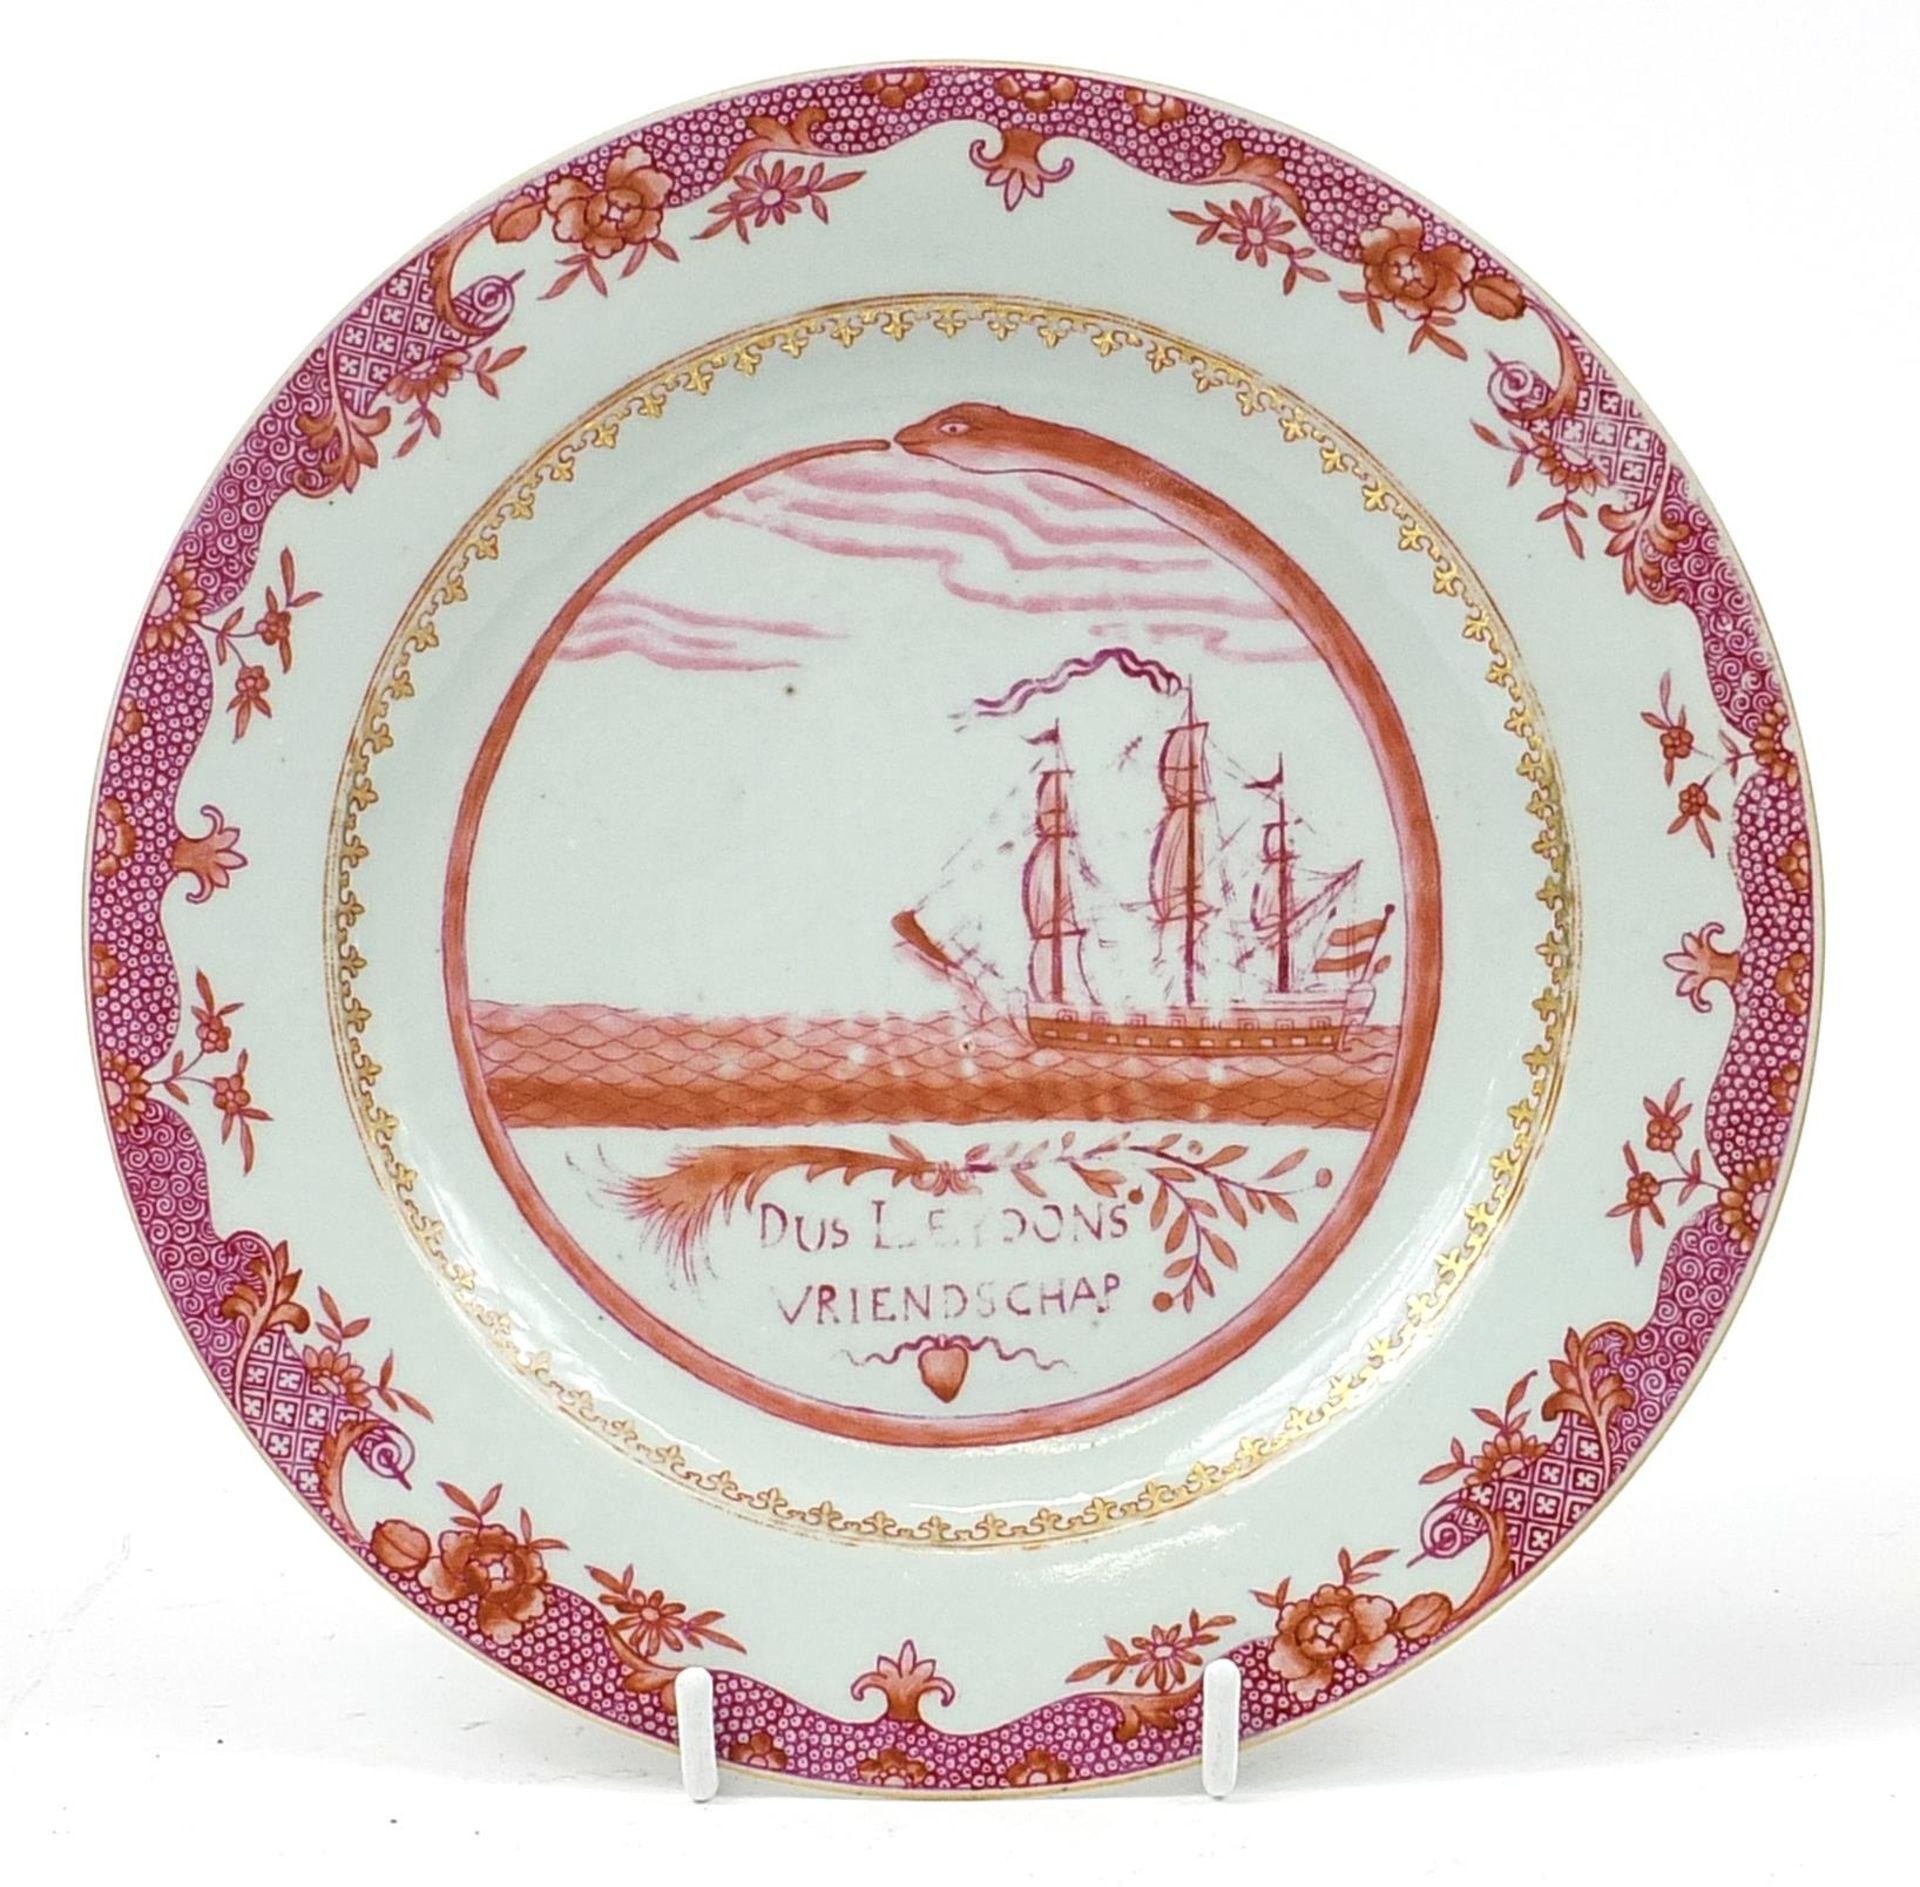 Chinese pink monochrome porcelain plate hand painted with a rigged ship, inscribed Dus Leydons